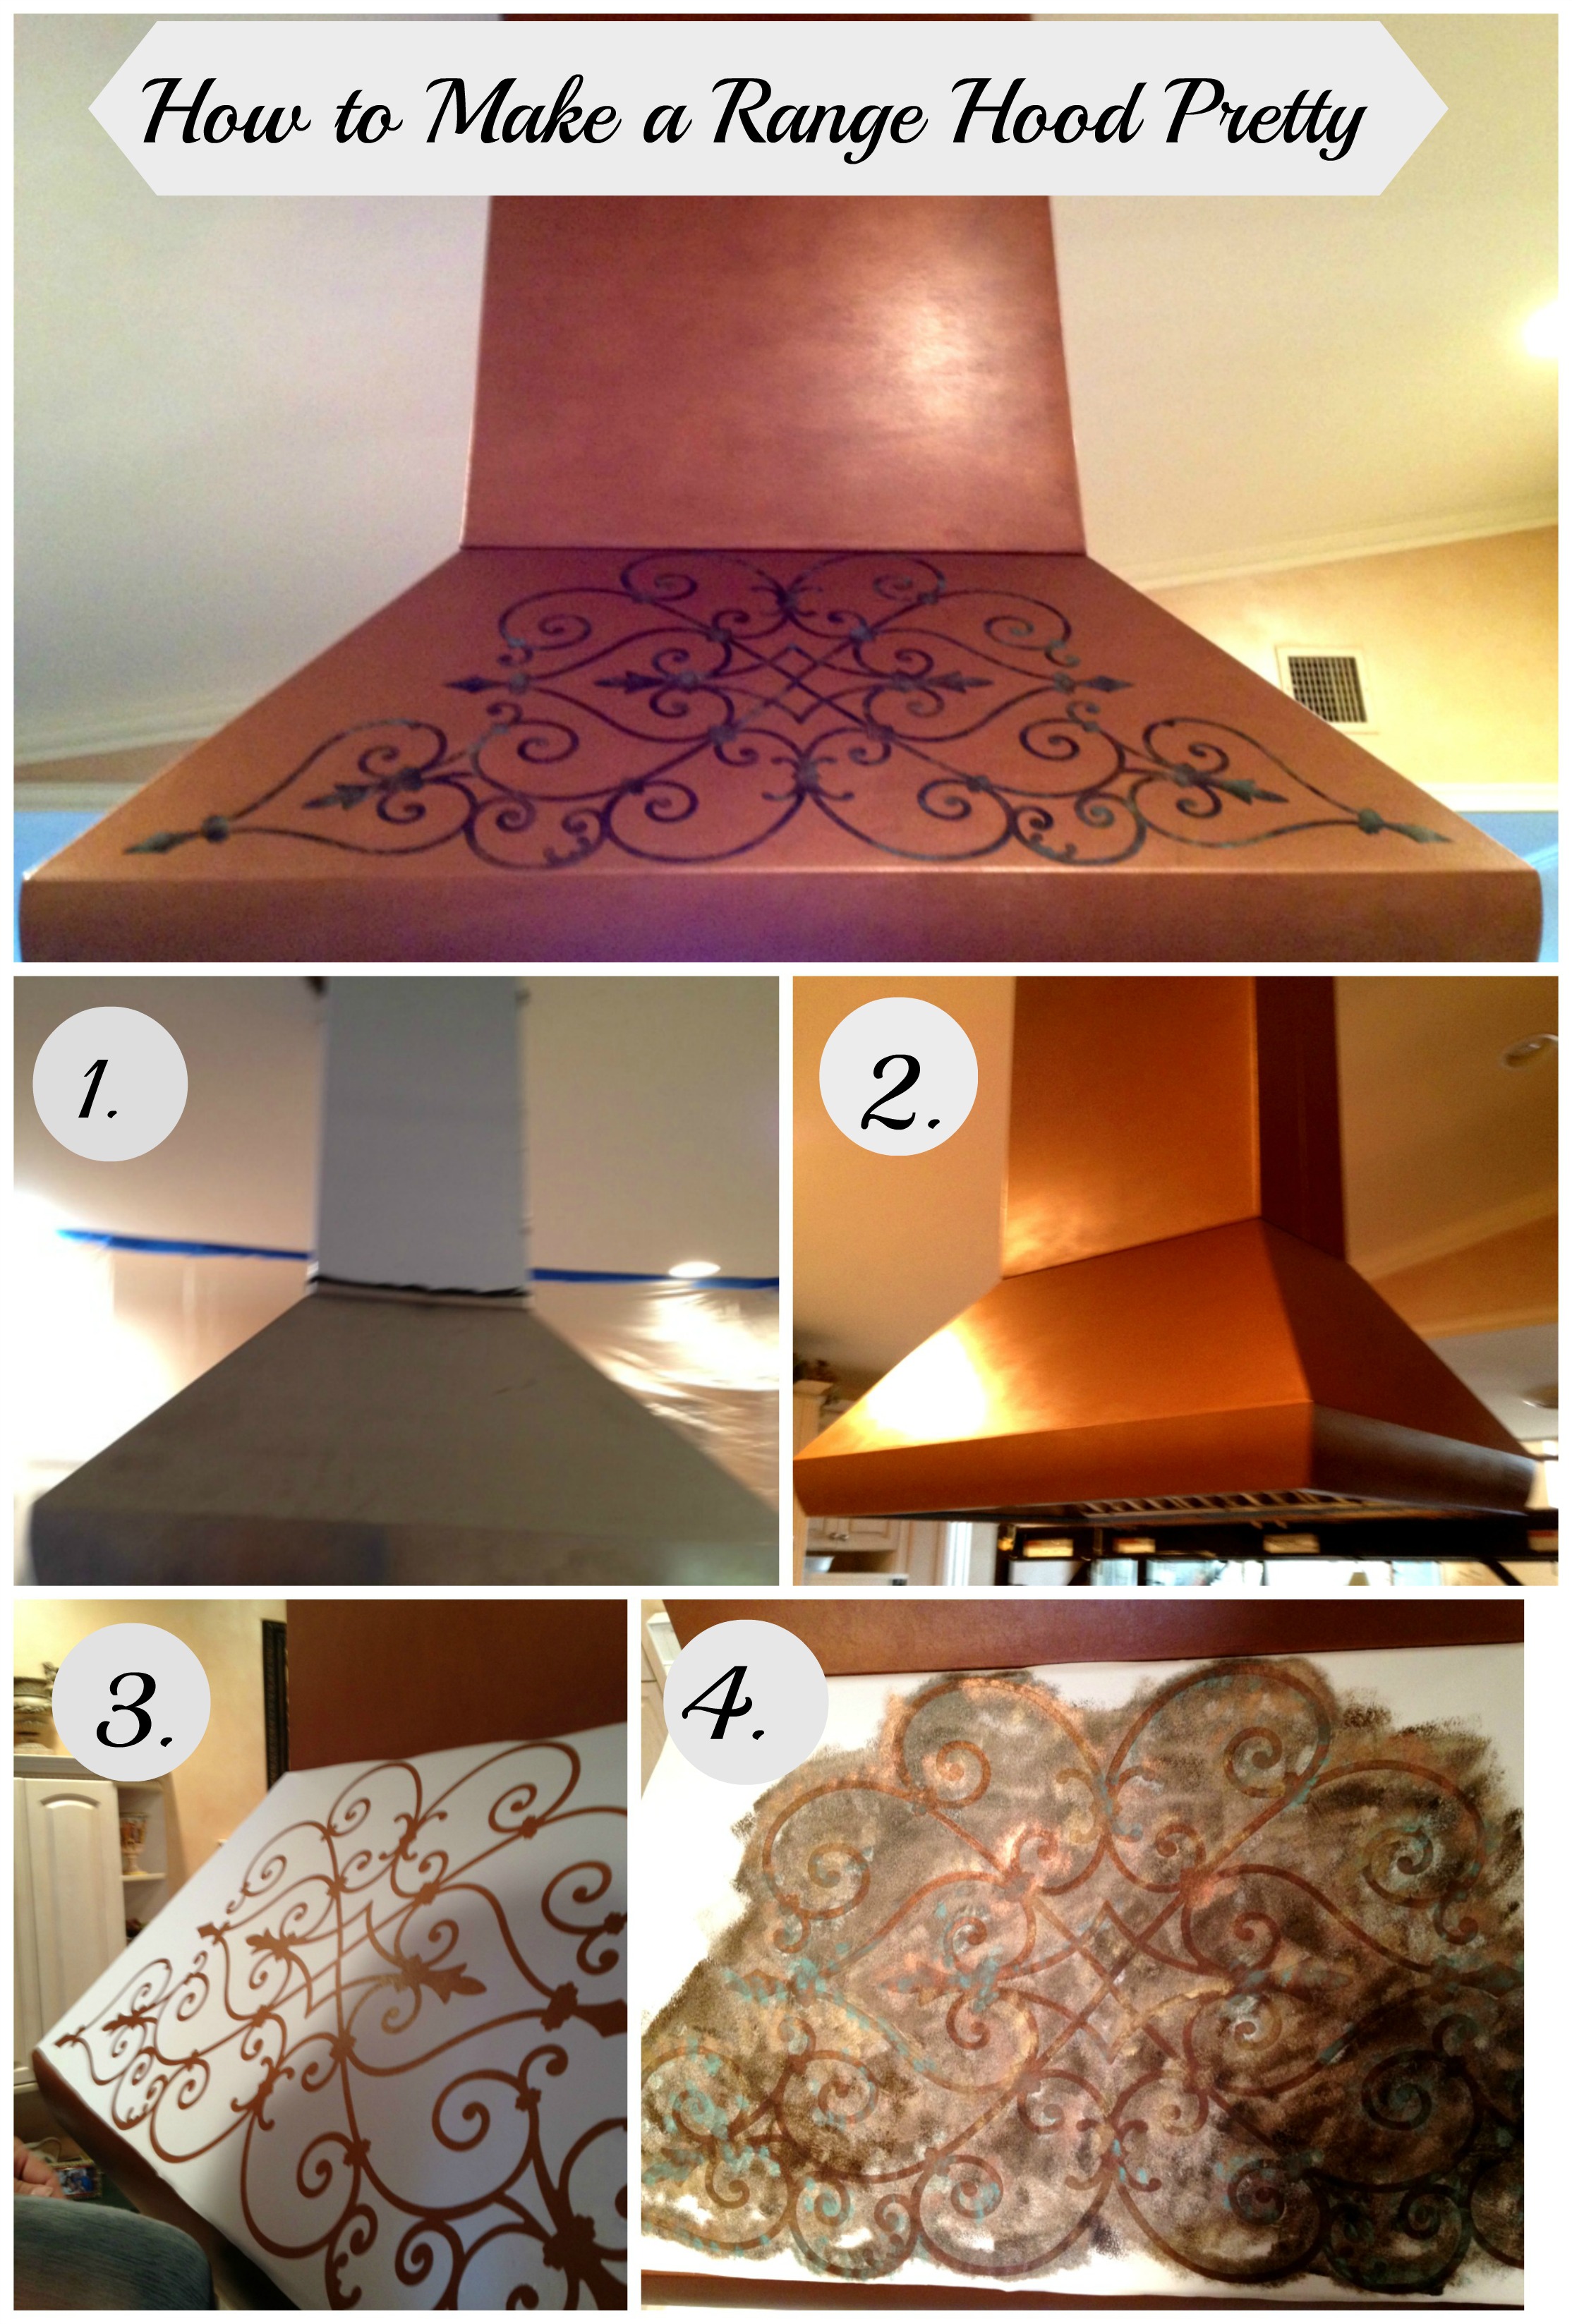 How to make a commercial range hood pretty